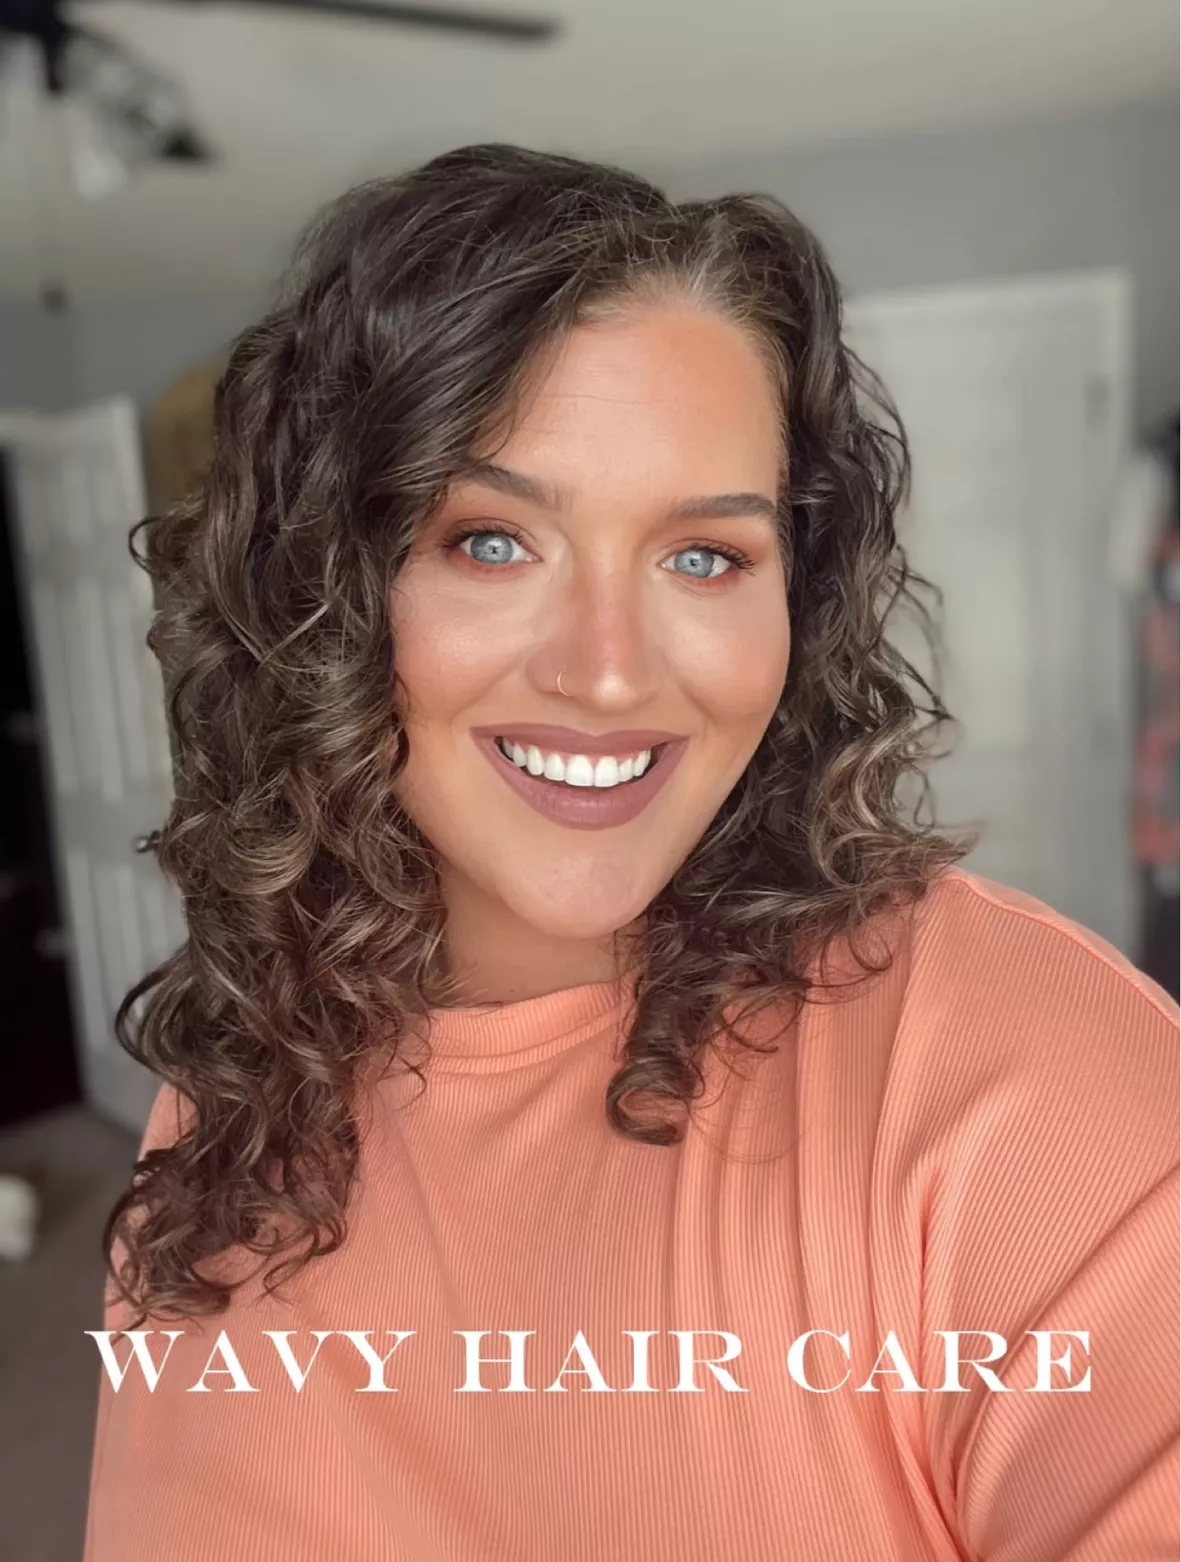 Curly Hair Products  BondiBoost –